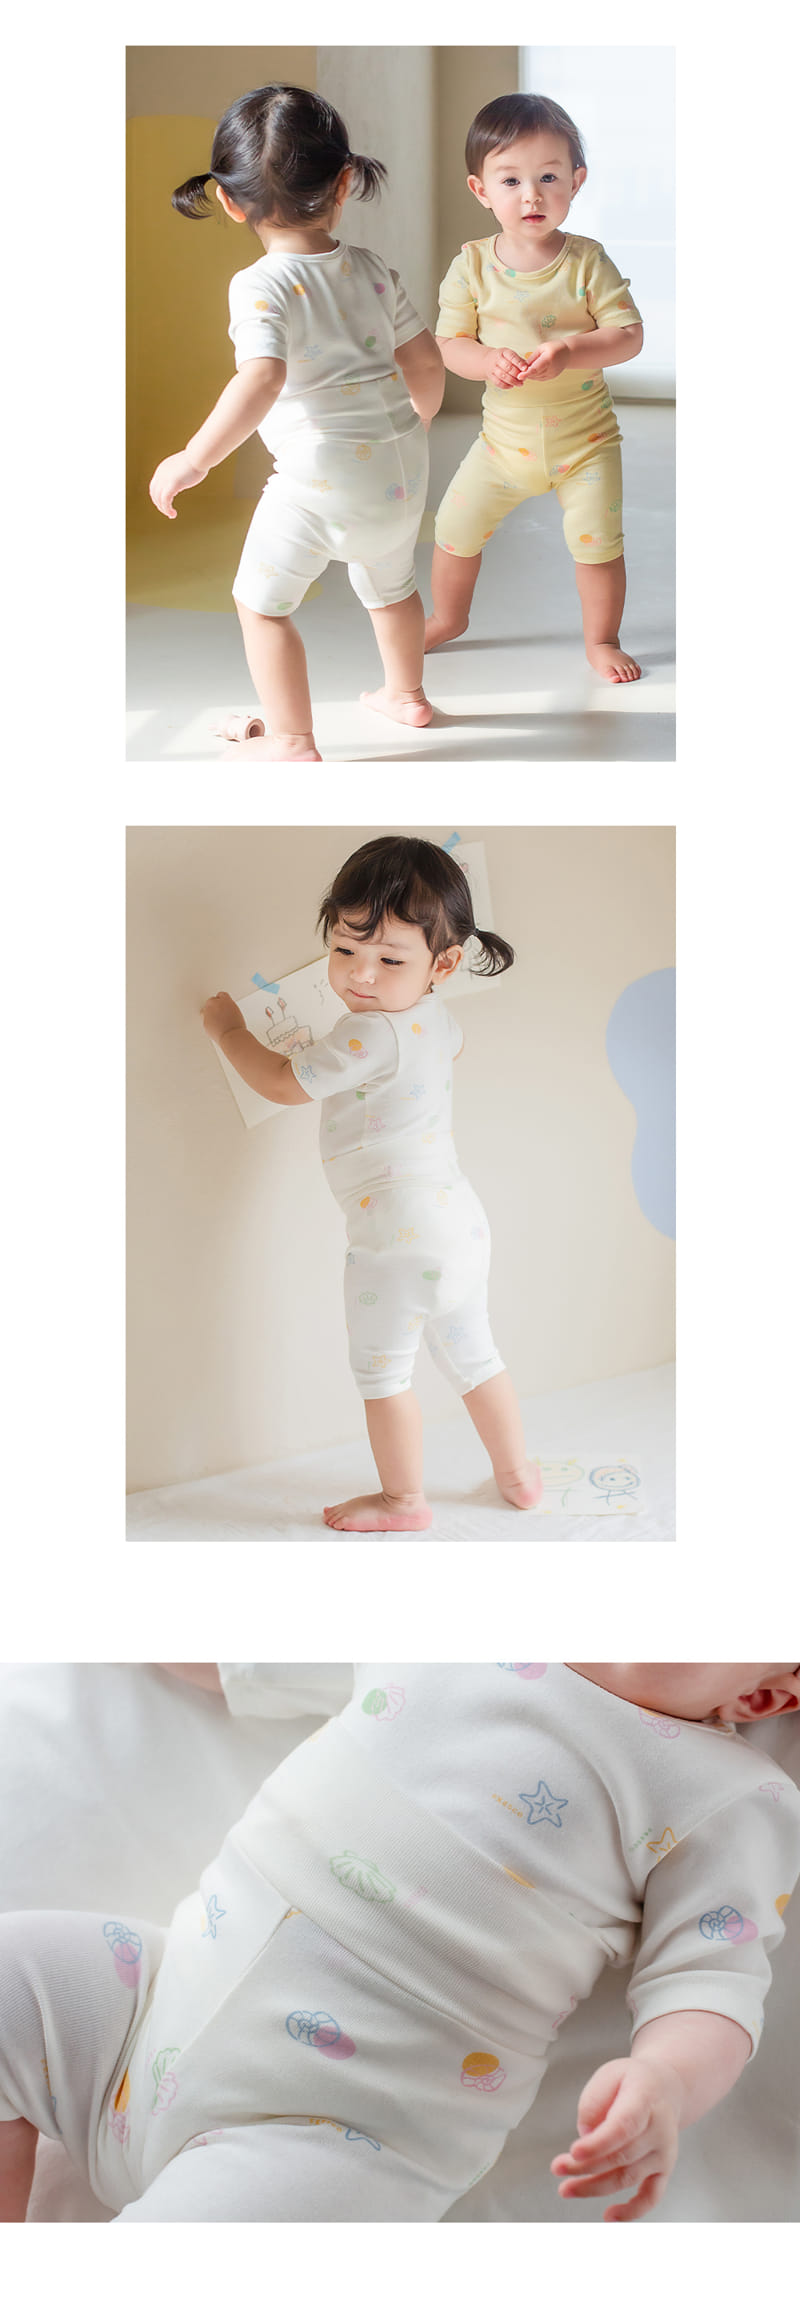 Kids Clara - Korean Baby Fashion - #babyboutique - Mare Compy Belly Baby Easy Wear - 7